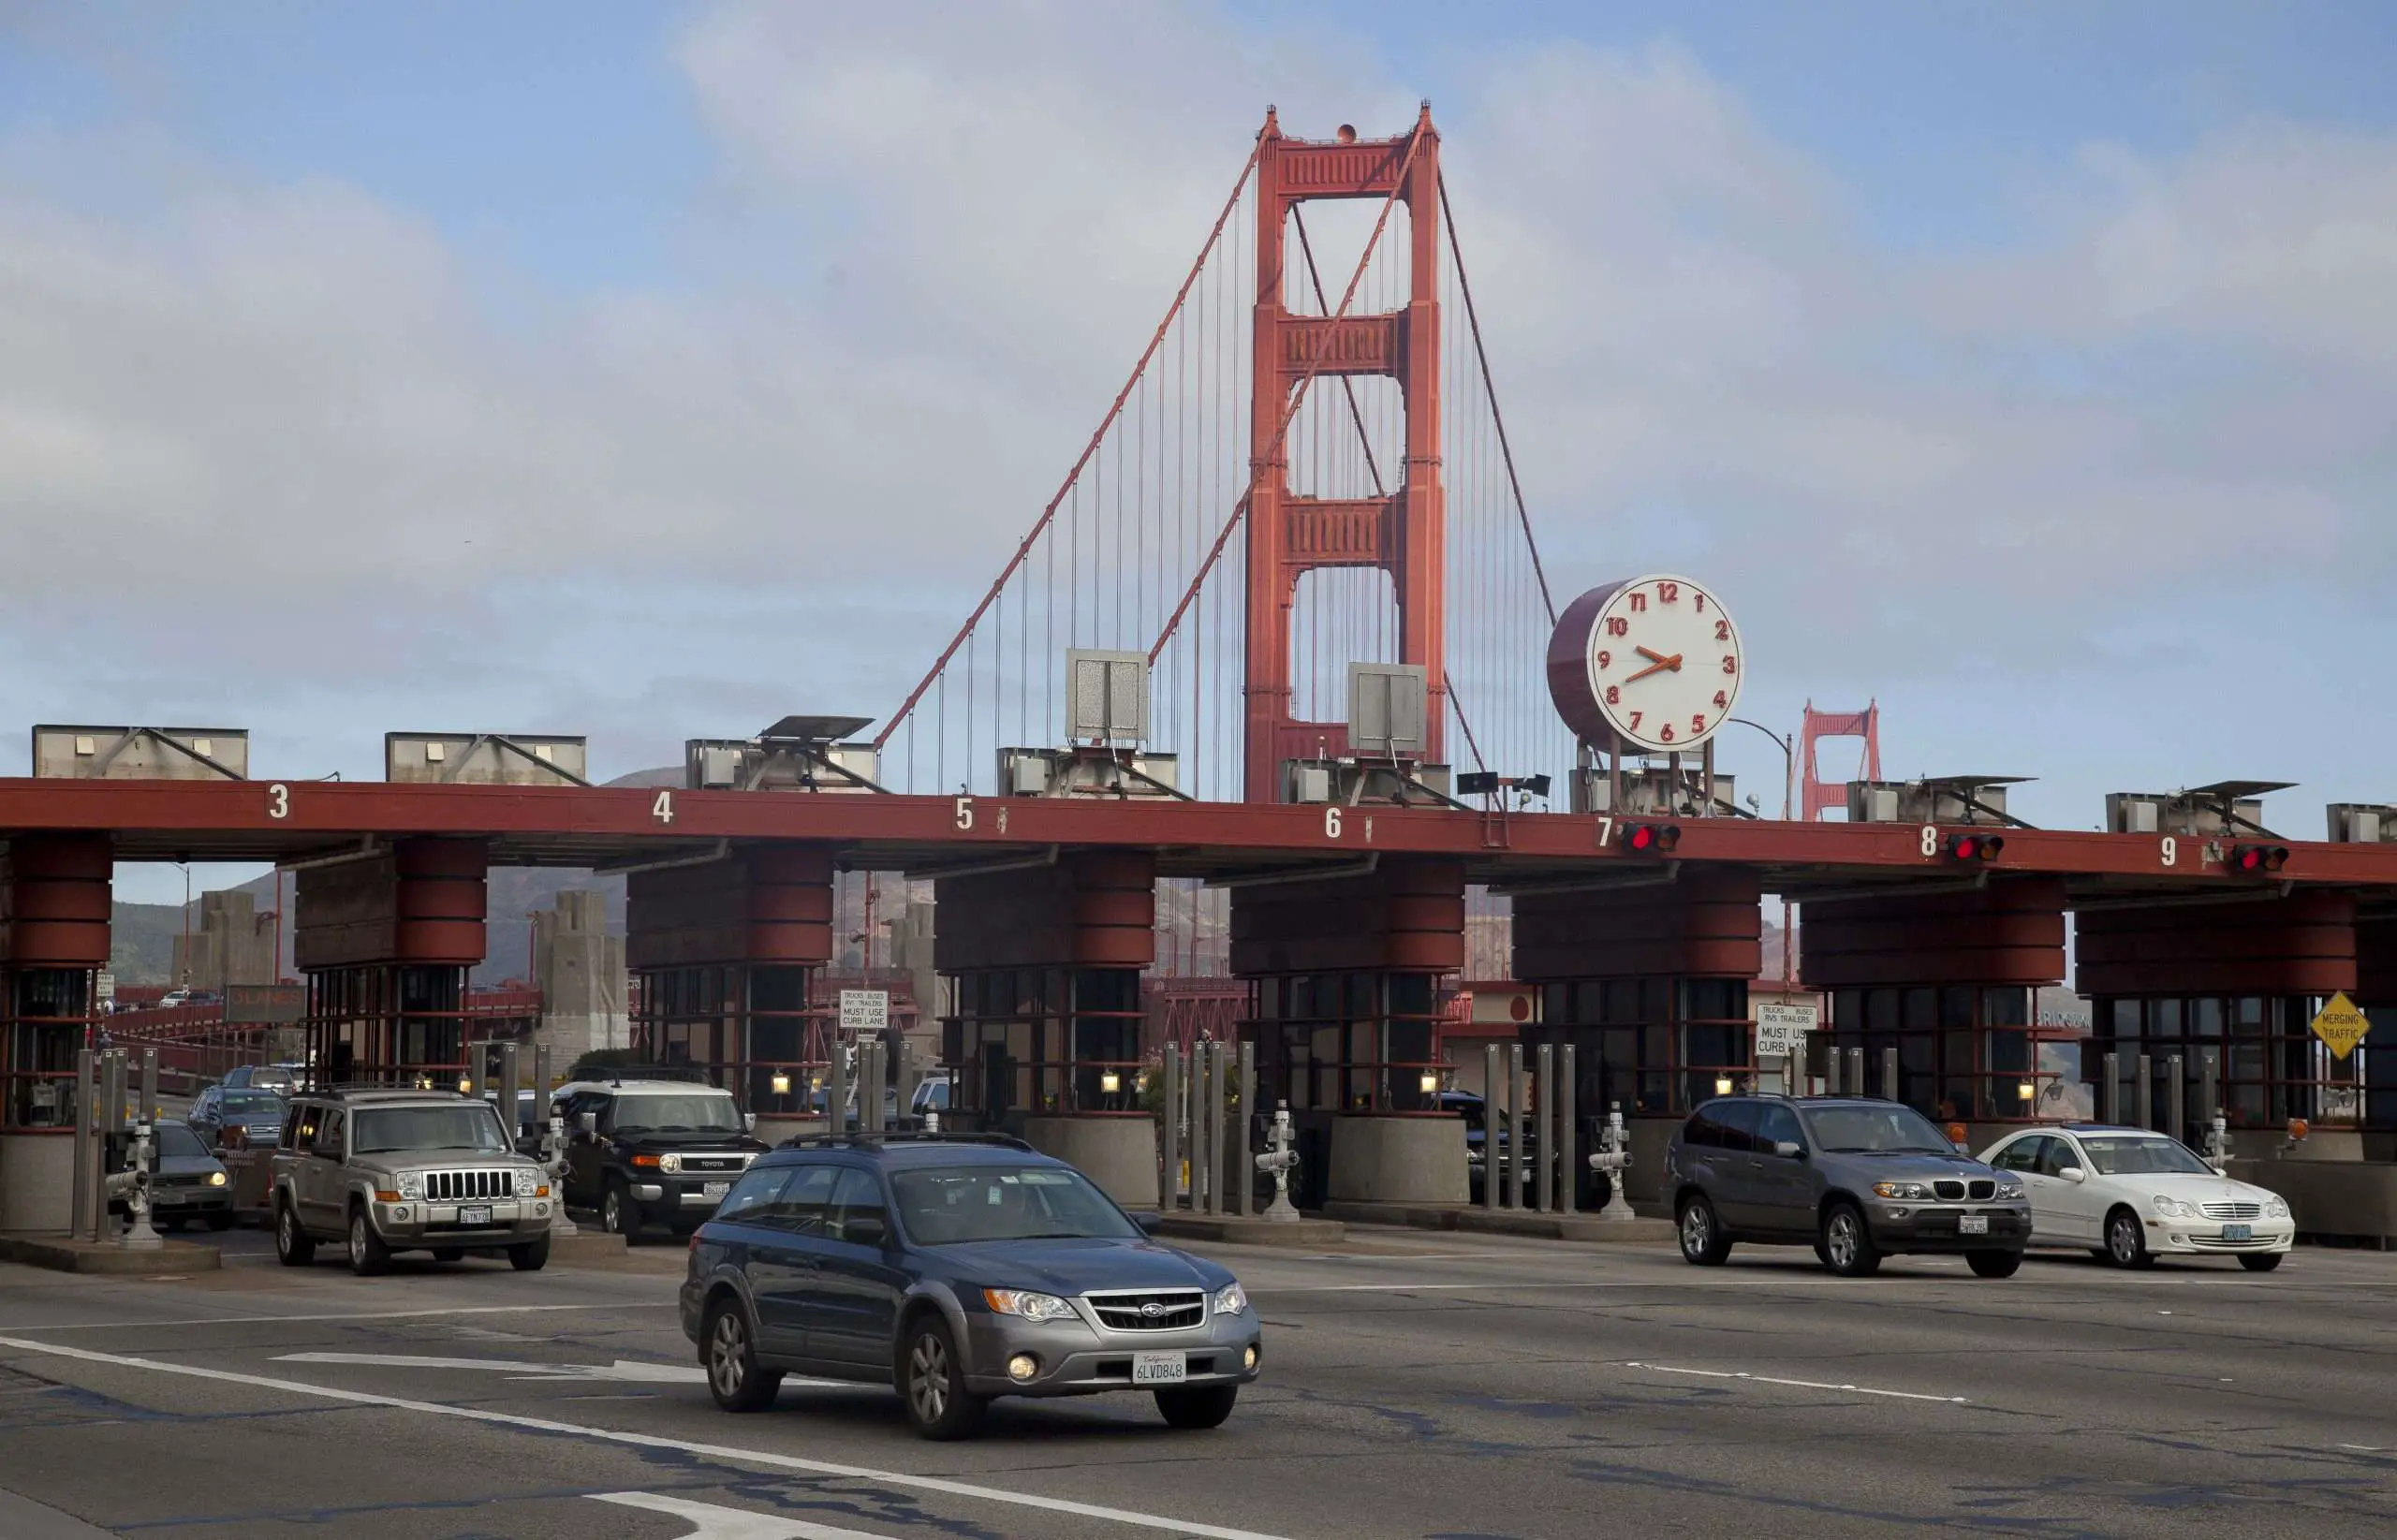 Construction on Golden Gate Bridge Will Cause Slow Traffic this Week